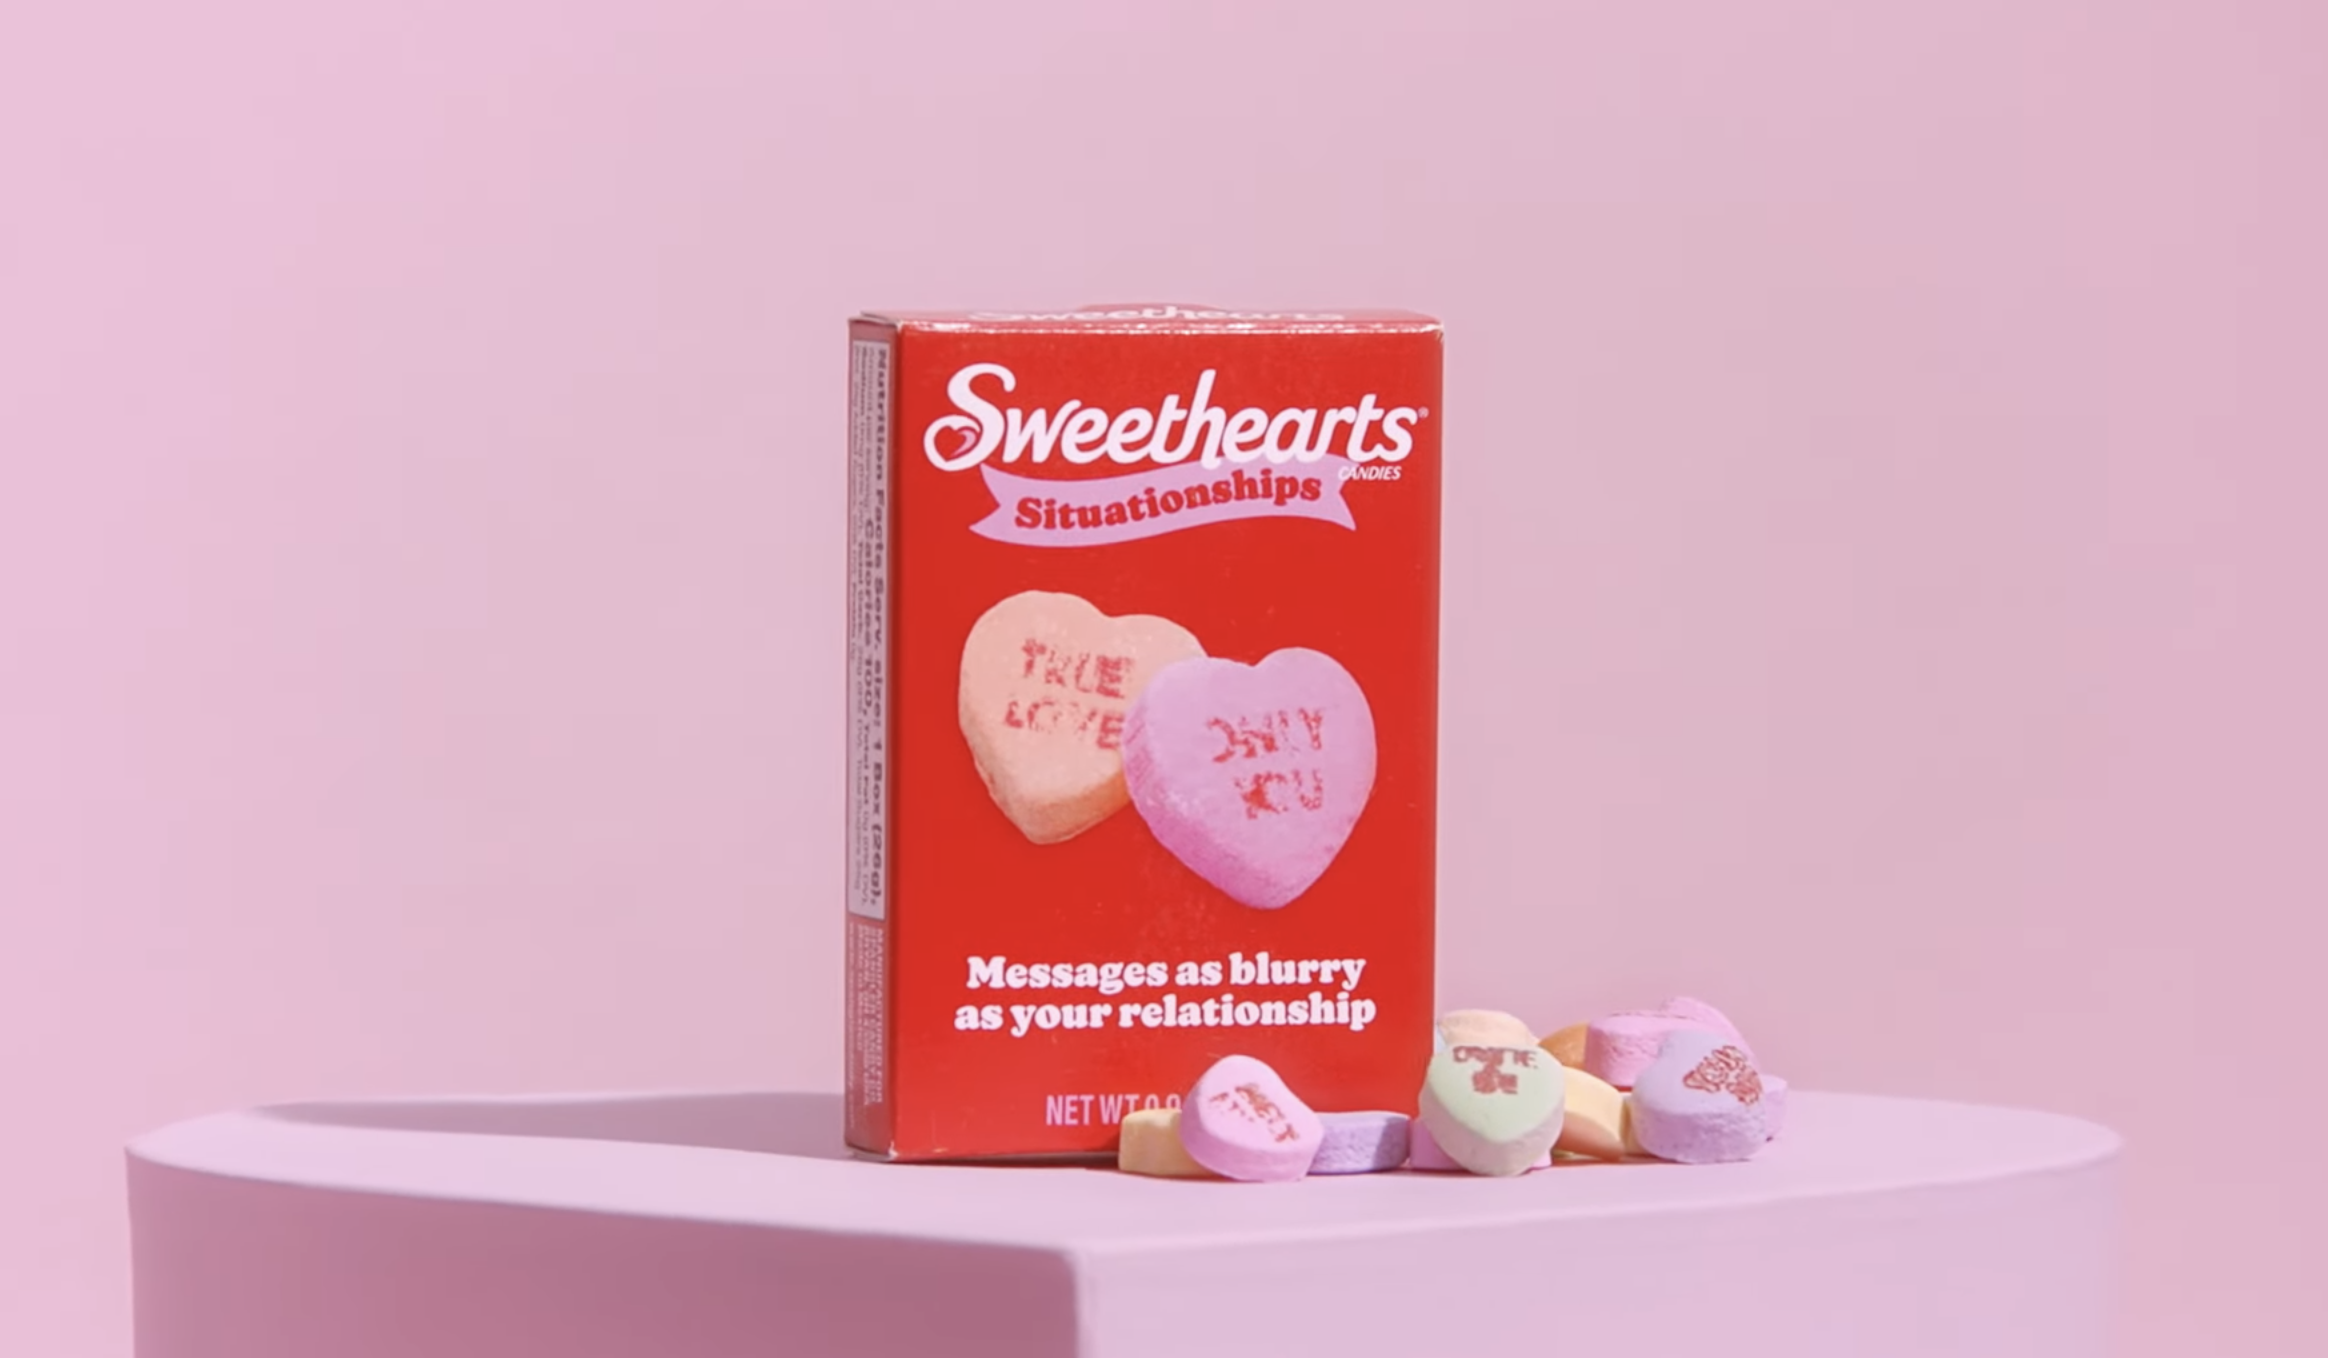 ‘Situationships’ Aren’t Sweet, No Matter What Corporate Candymakers Try To Sell You